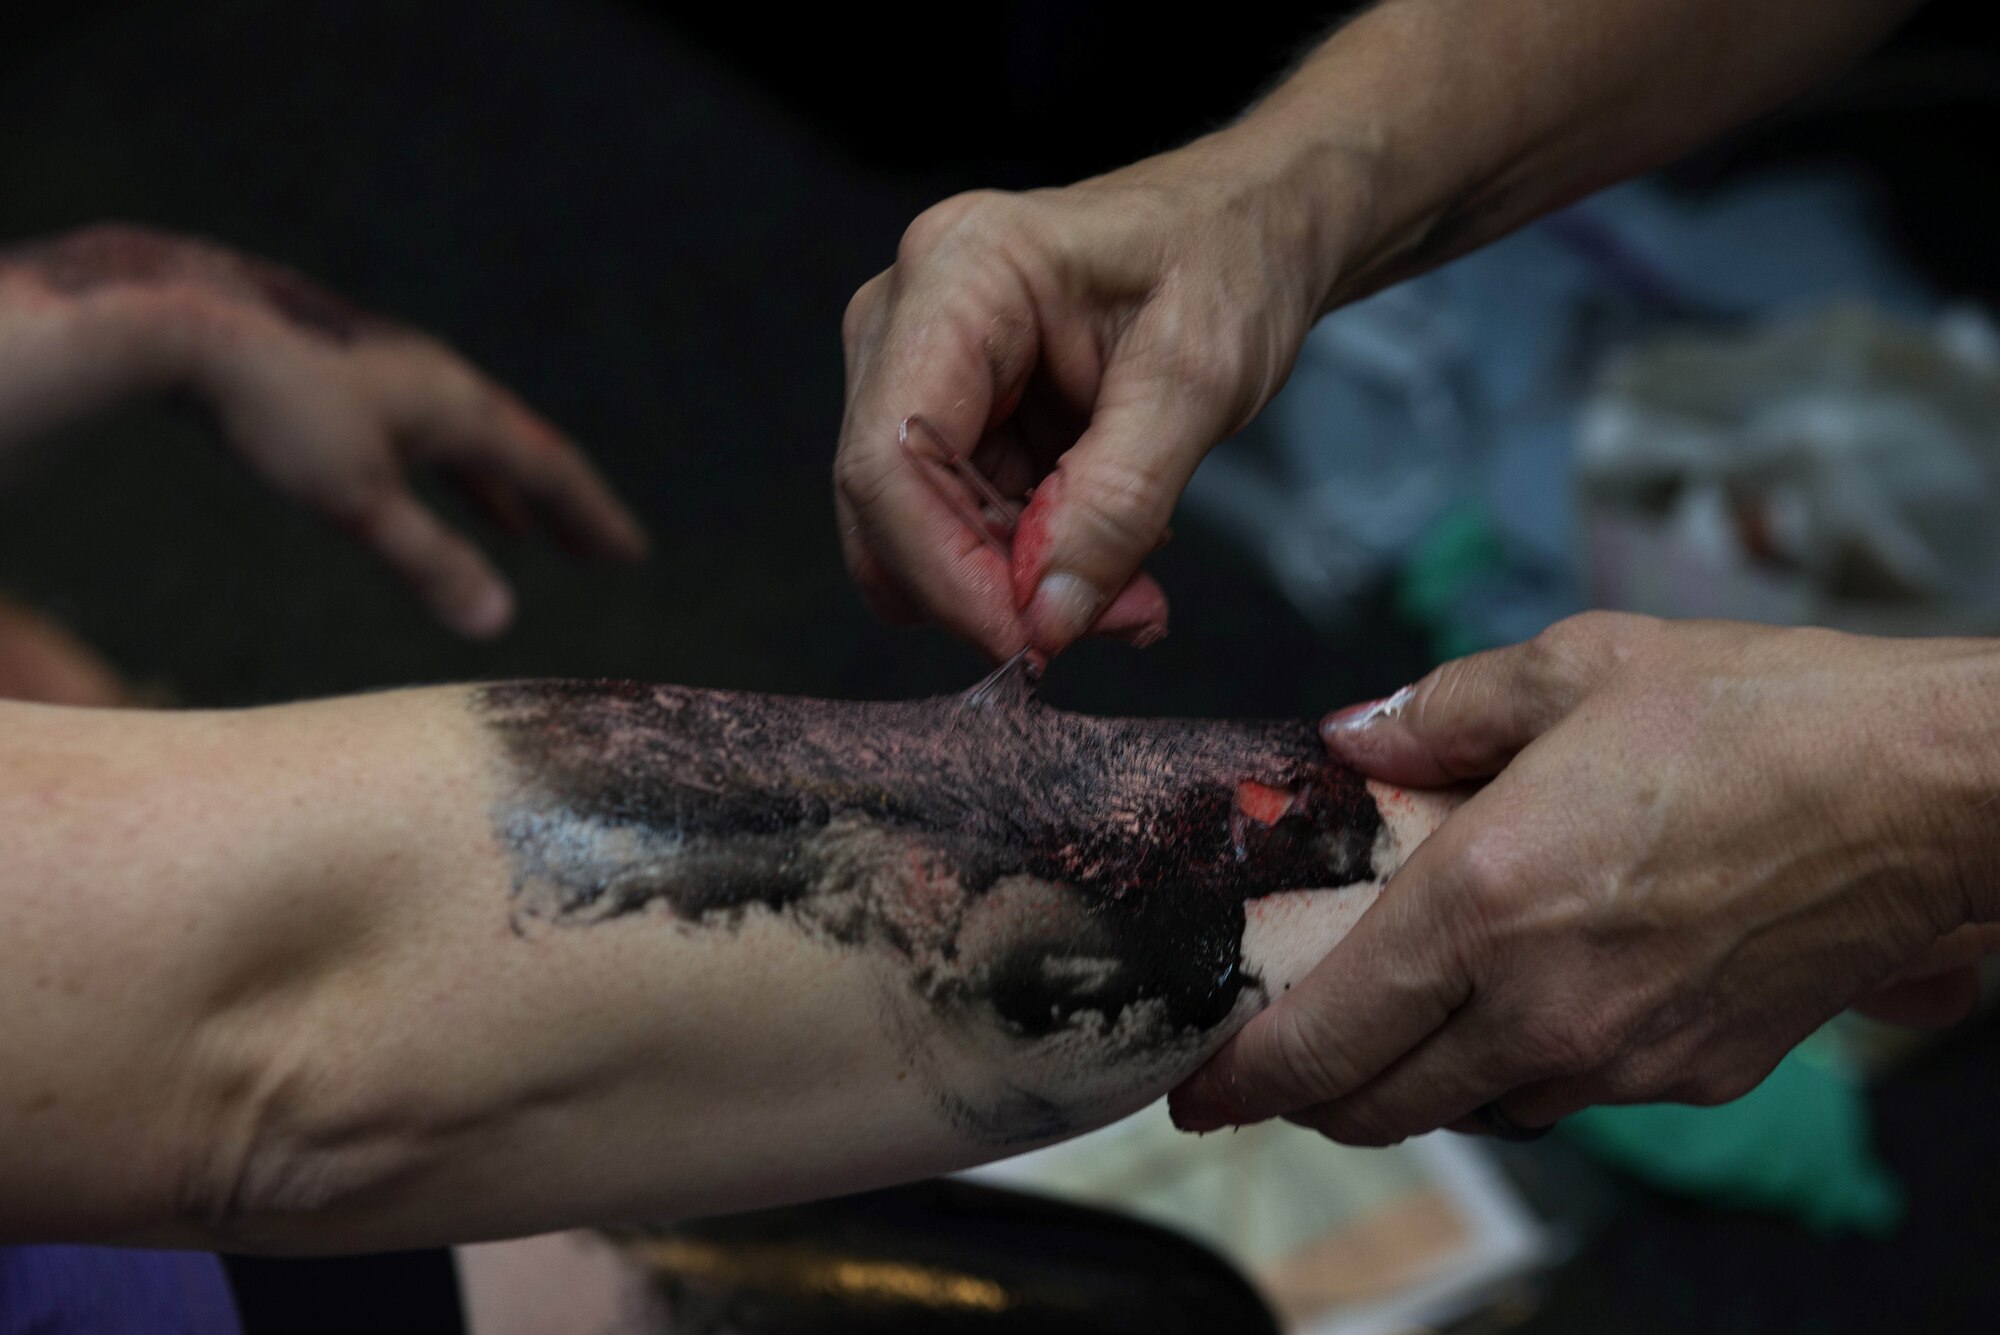 U.S. Air Force Lt. Col. Cheryl Lockhart, 20th Medical Group chief nurse, right, applies moulage to a simulated patient at Shaw Air Force Base, South Carolina, Aug. 1, 2019.